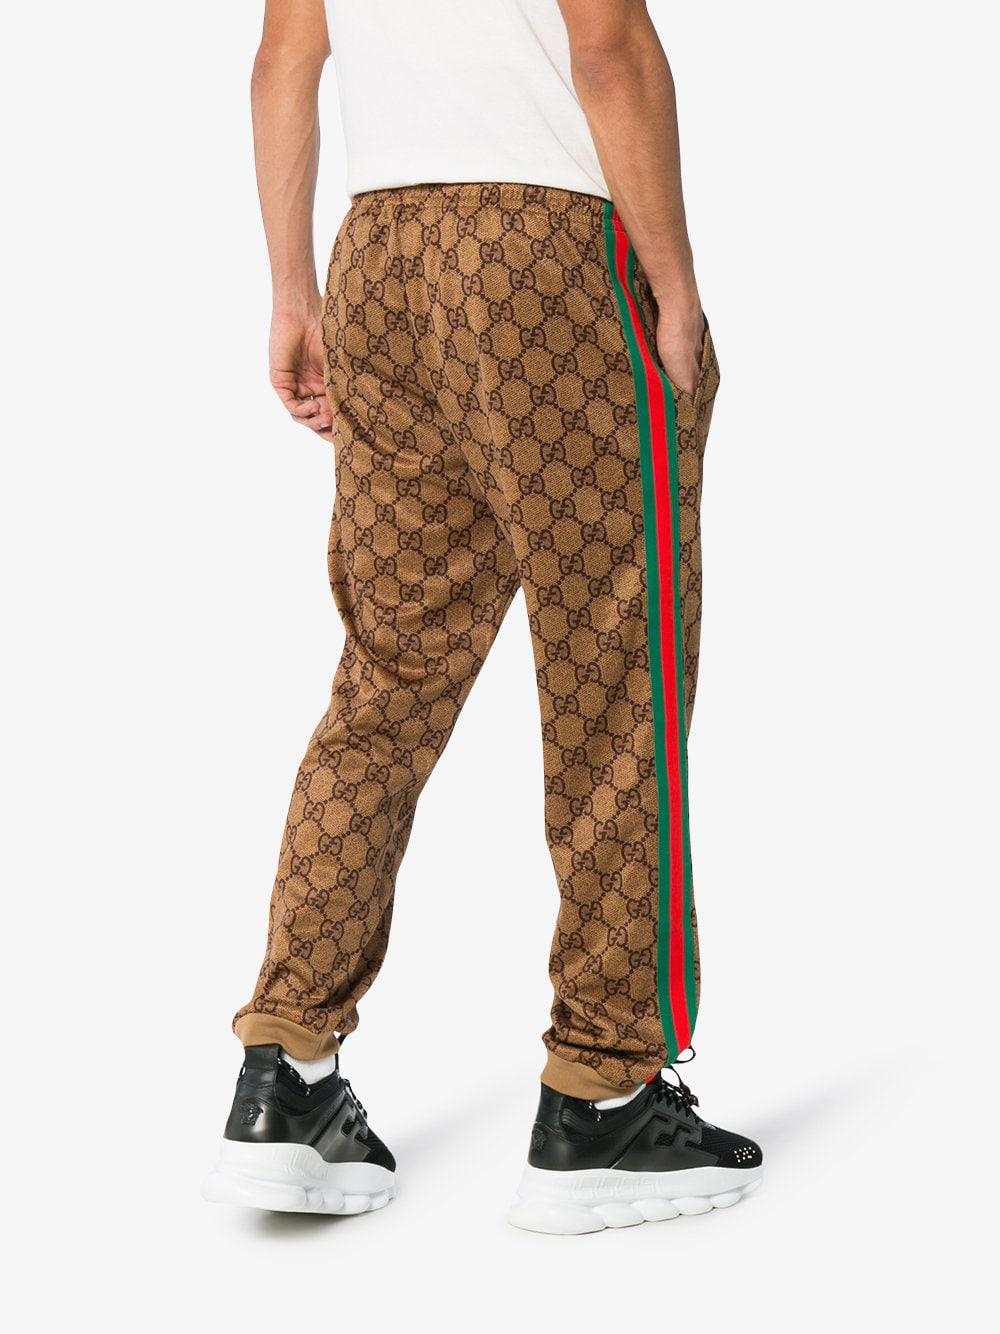 Gucci GG Supreme Print Cotton Blend Sweat Pants in Brown for Men